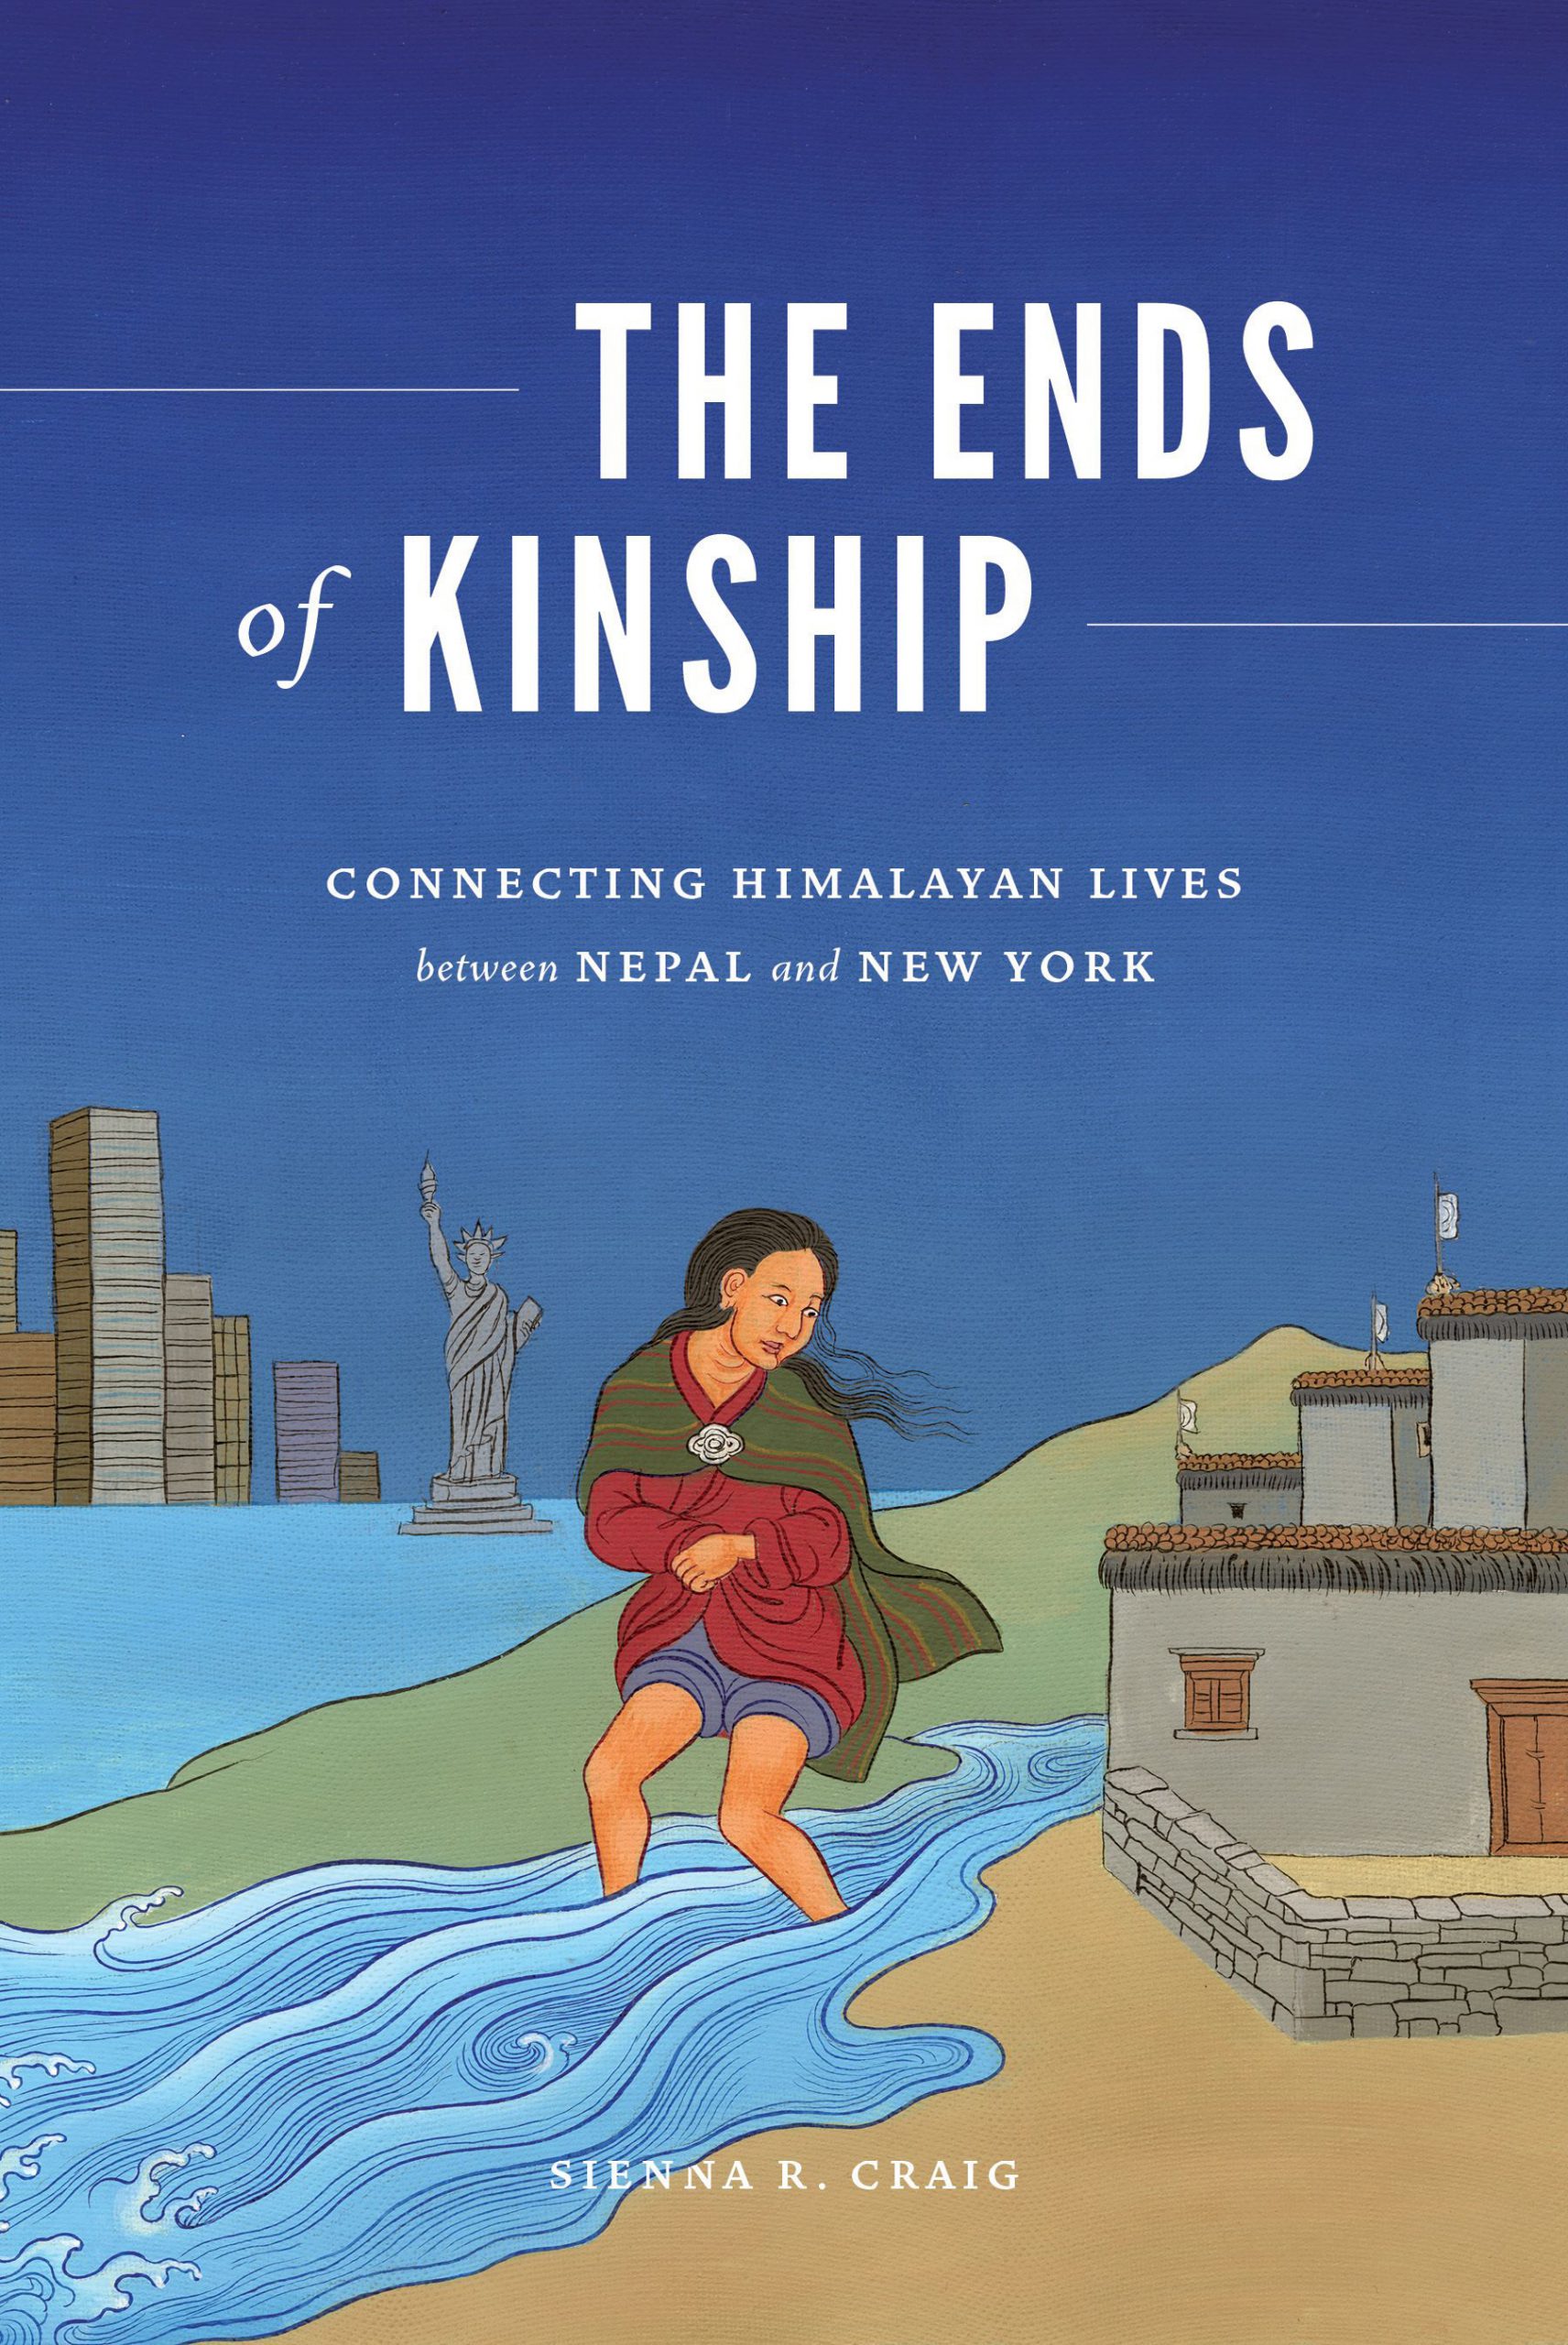 THE ENDS OF KINSHIP